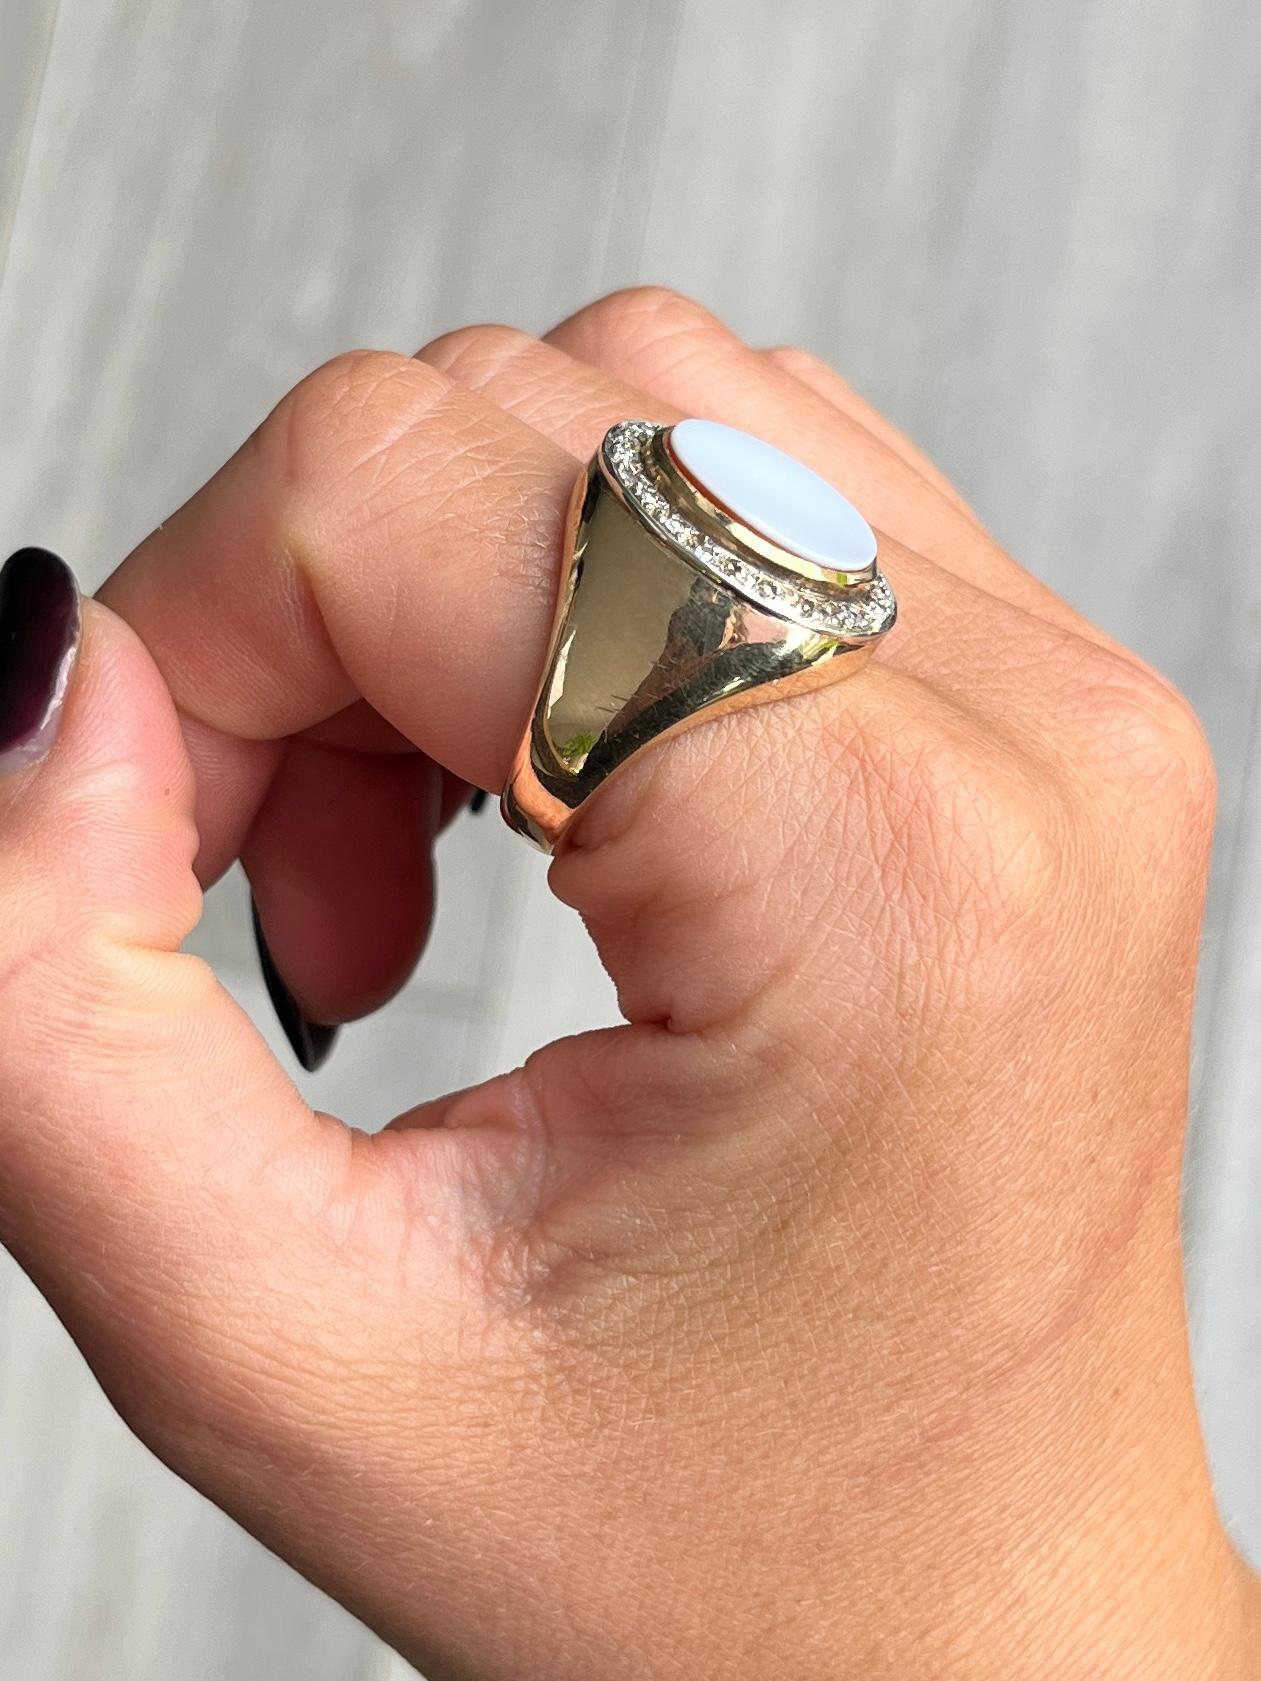 A superb signet ring, set with a brilliant oval cut sardonyx and surrounded by diamonds. Diamond halo total 20pts. Modelled in 18carat yellow gold. Hallmarked Birmingham.

Ring Size: R 1/2 or 8 3/4 
Stone Dimensions: 12x14mm

Weight: 17g